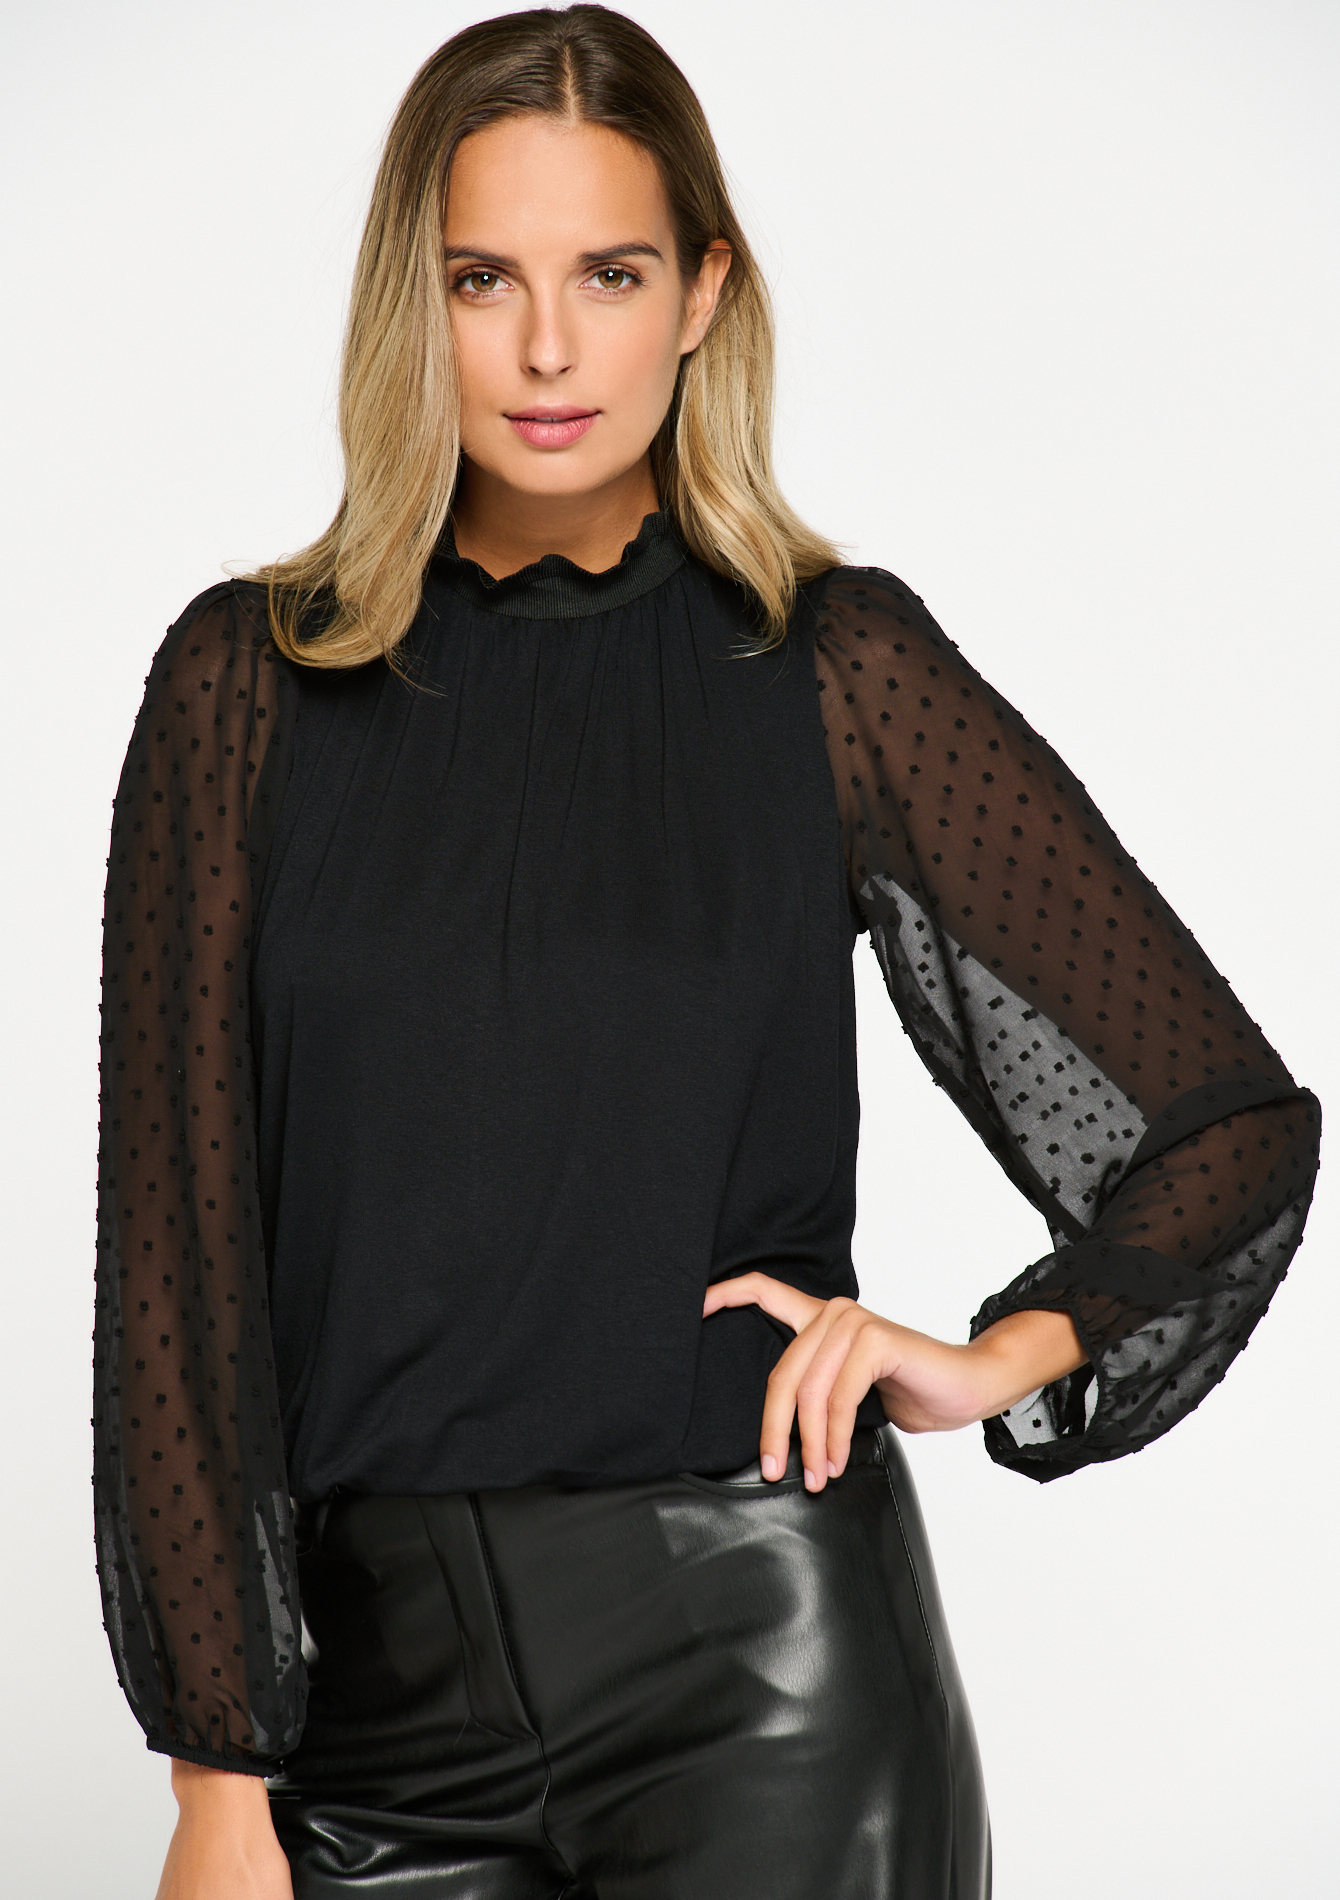 Blouse with transparent sleeves - LolaLiza